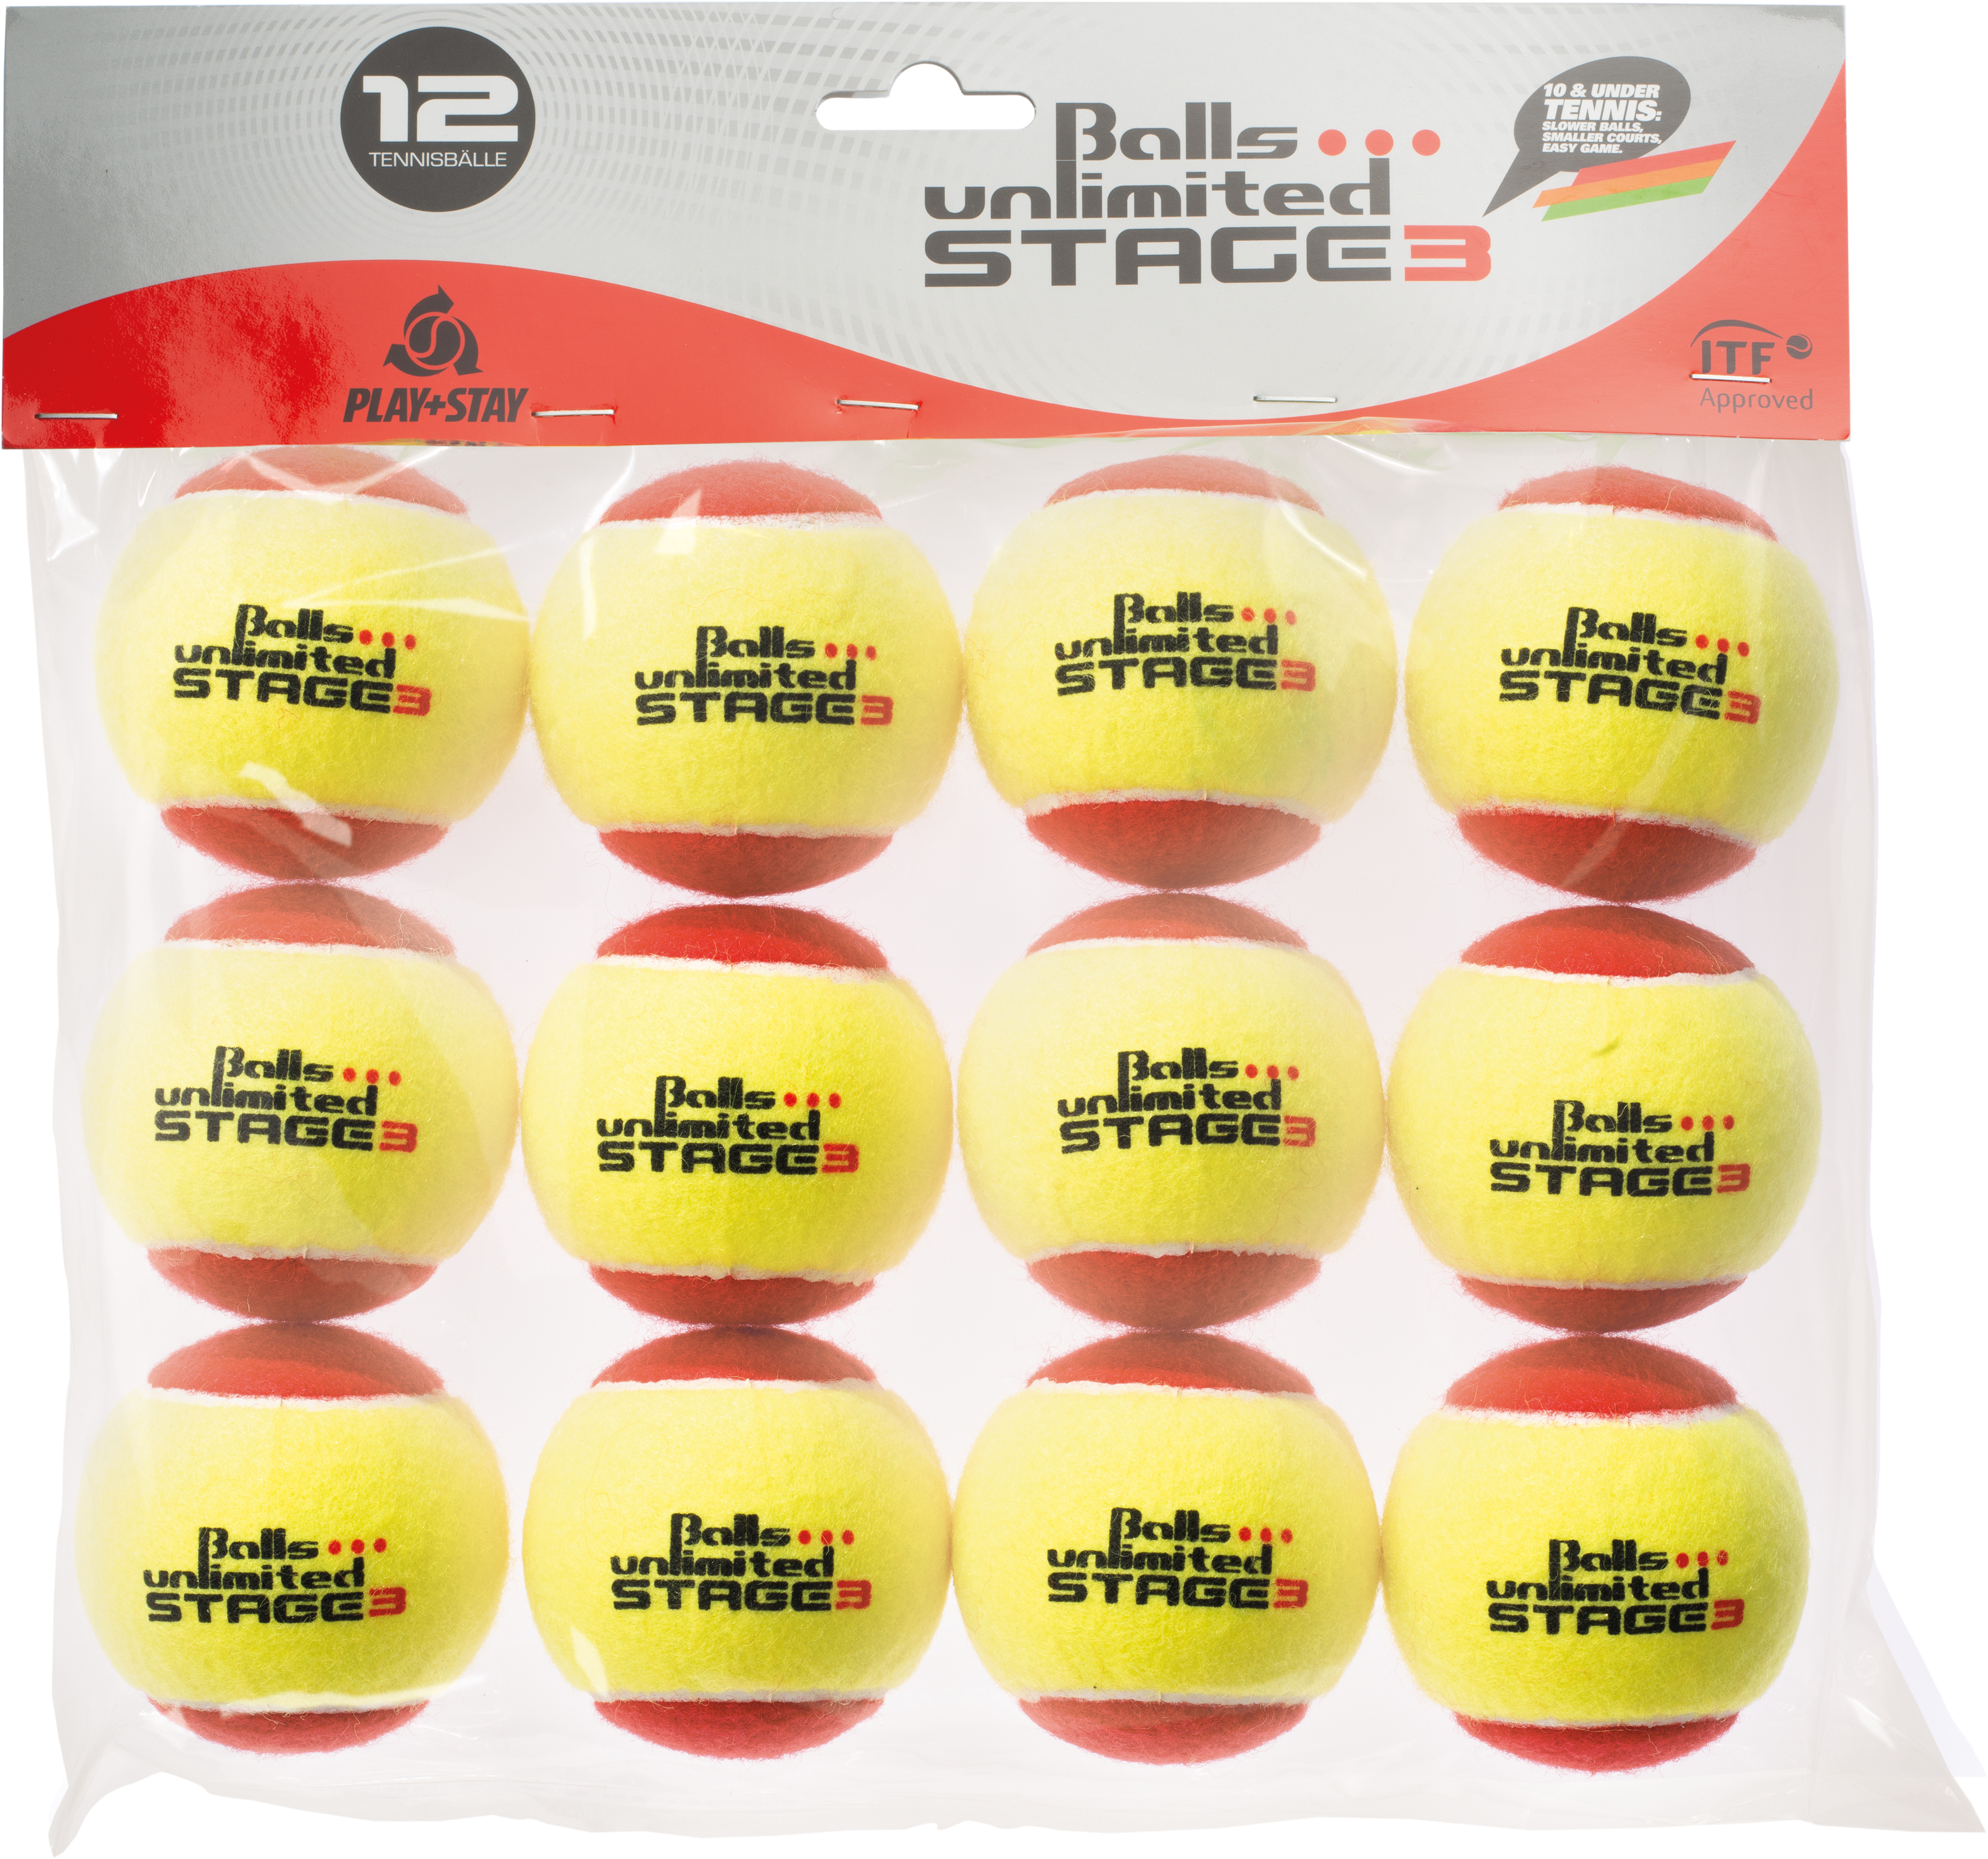 Tennisball Balls Unlimited Stage 3 - pack of 12